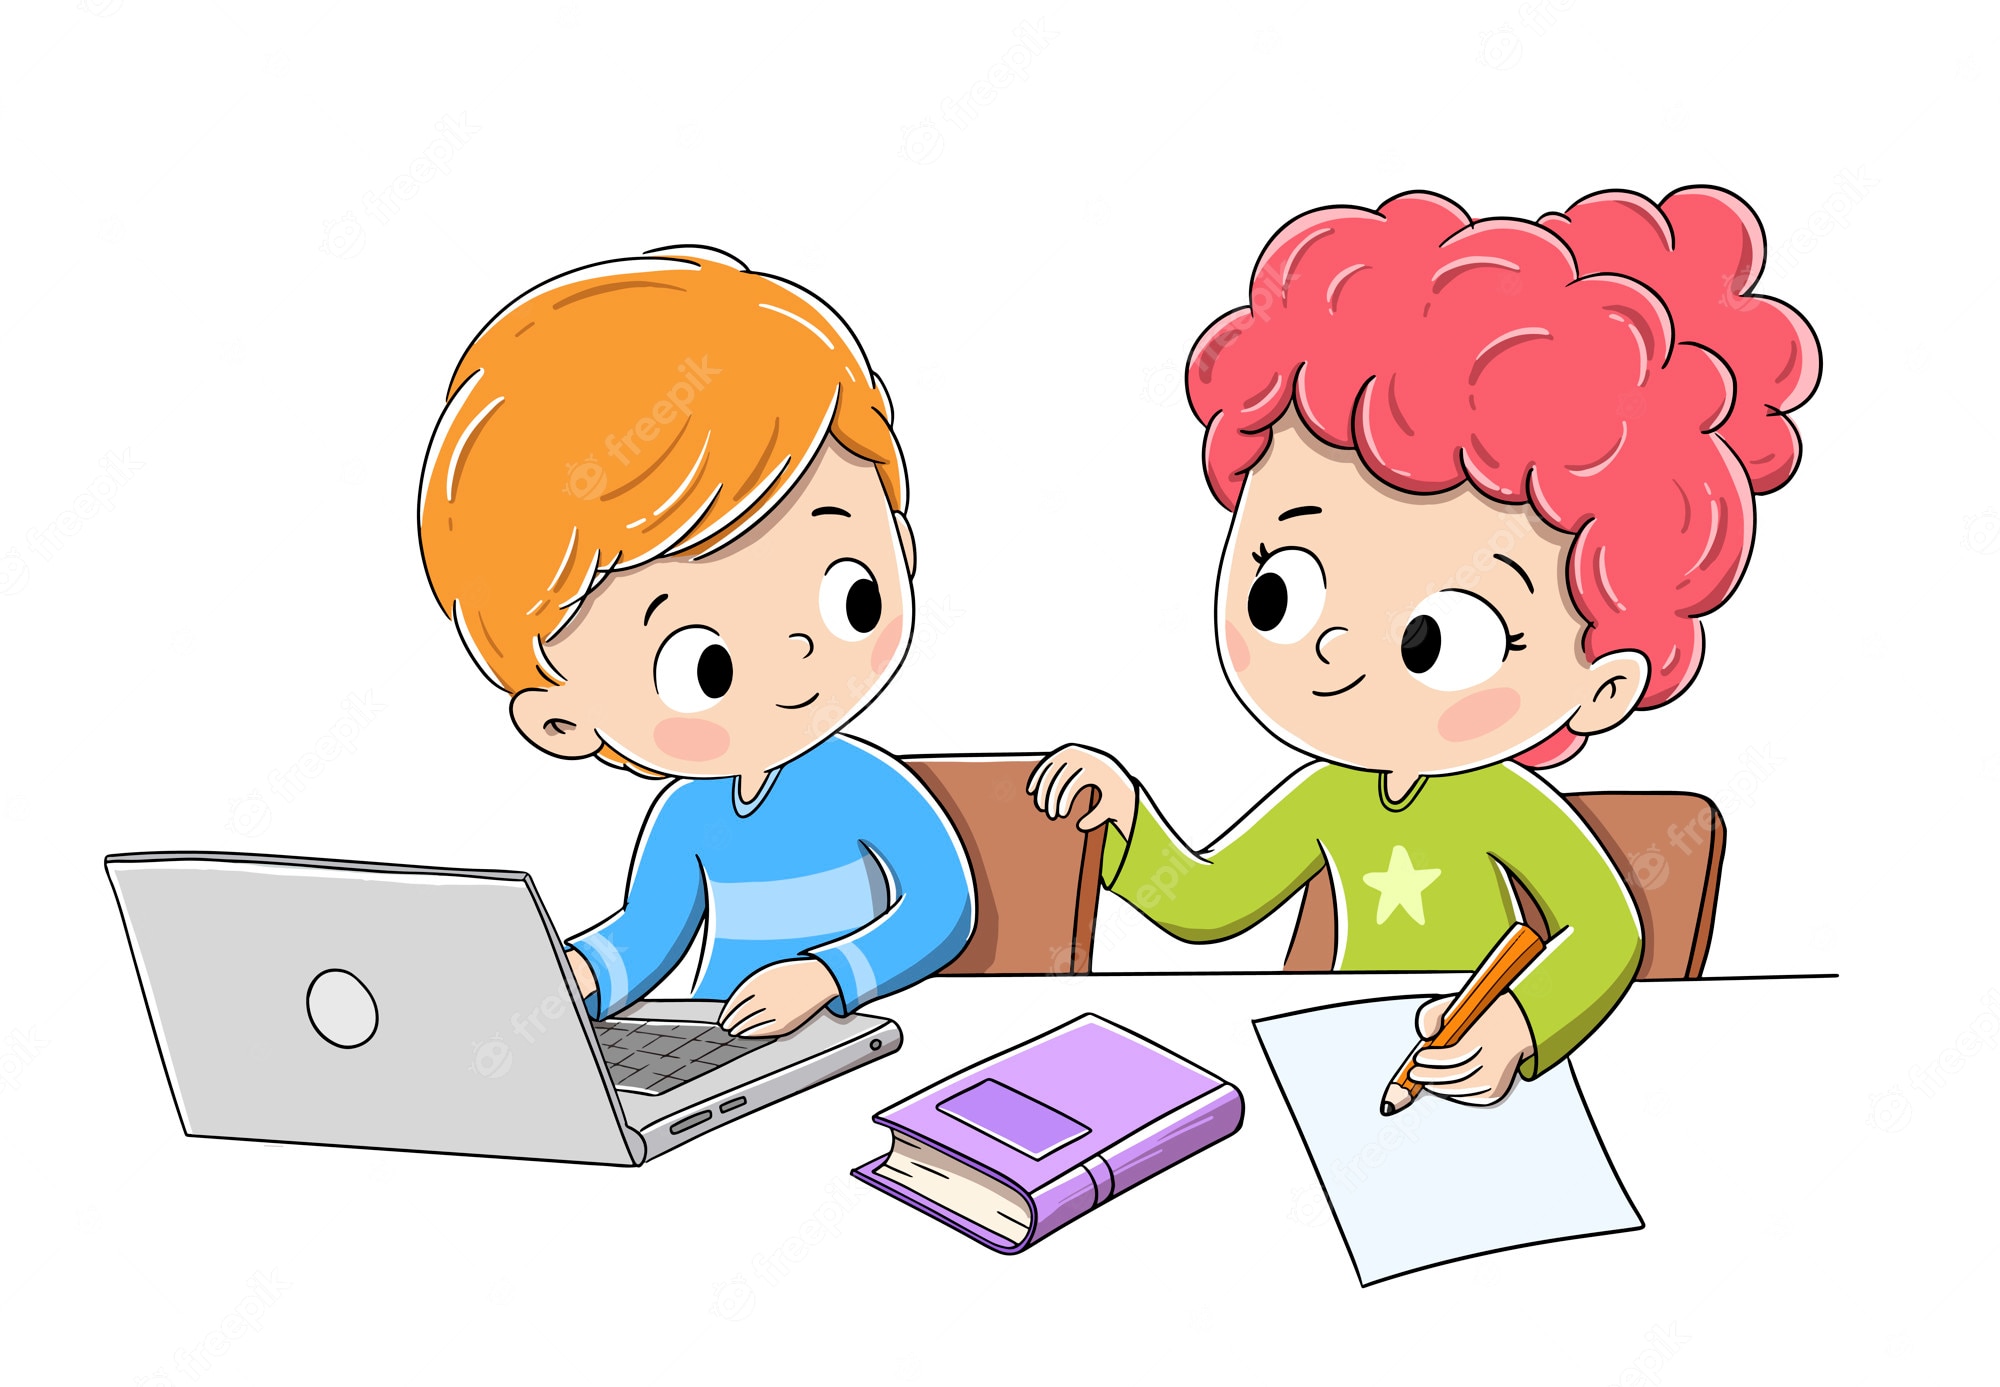 students on laptop clipart - Clip Art Library - Clip Art Library